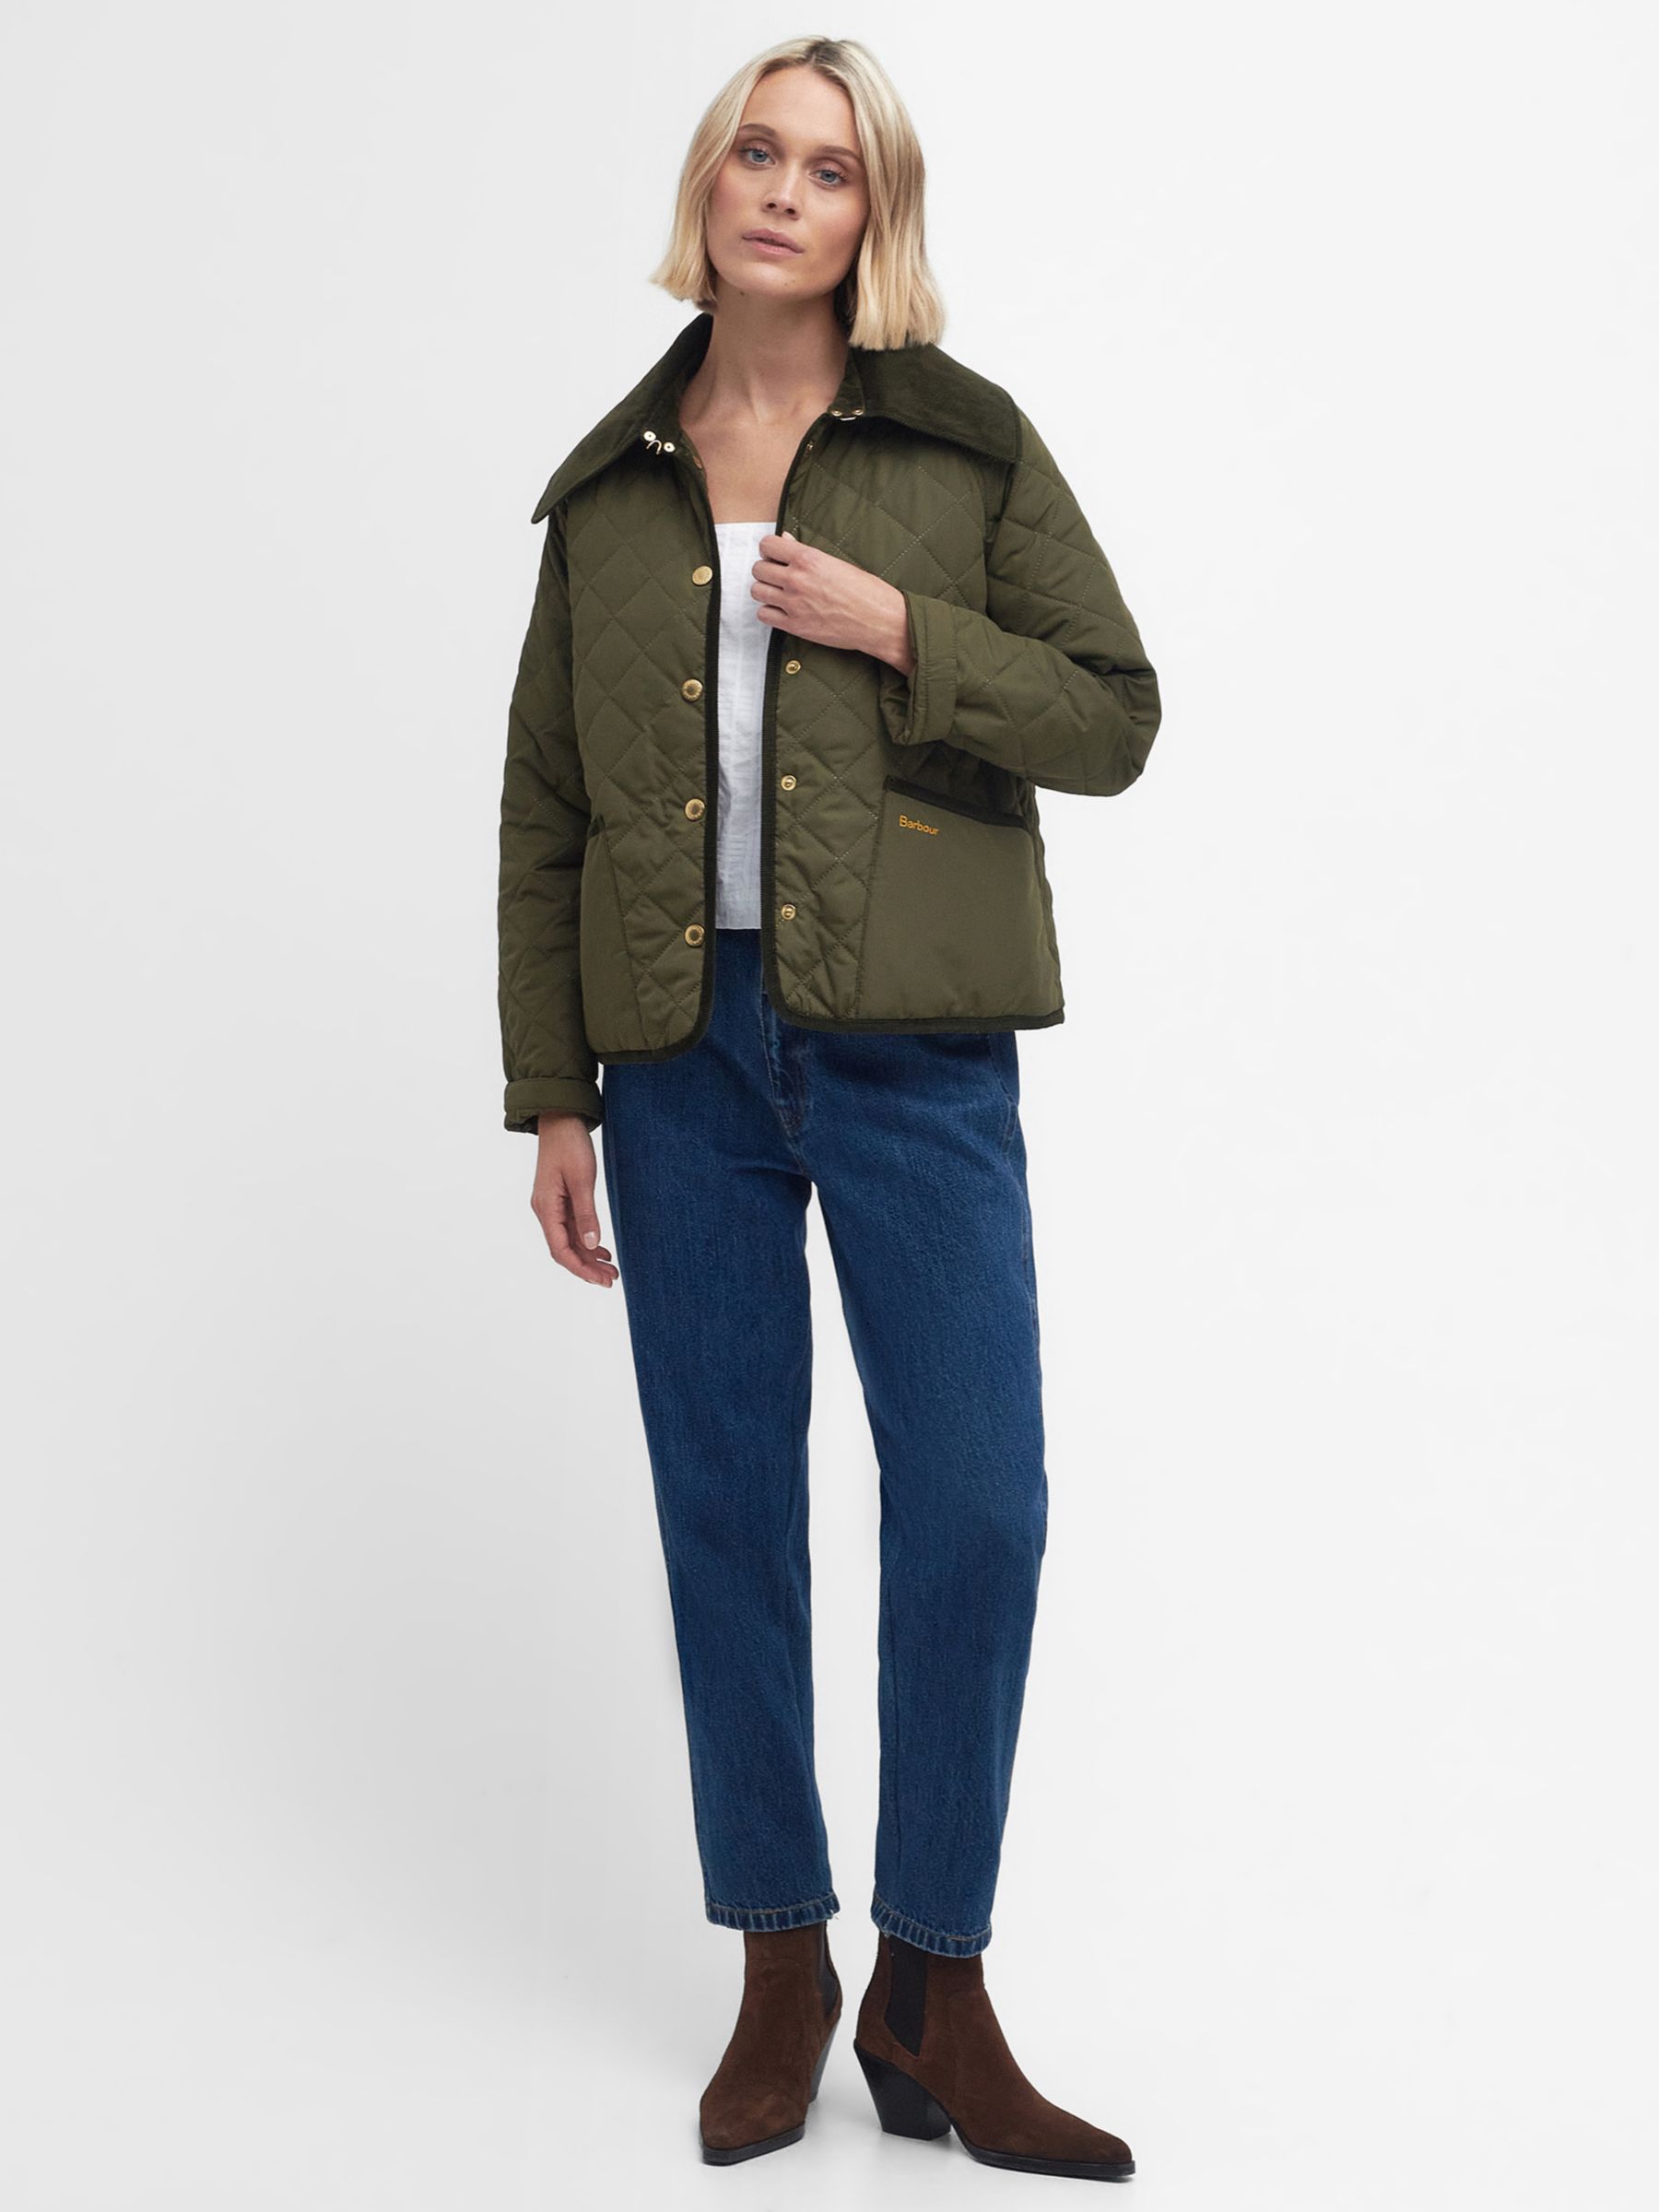 Barbour Gosford Quilted Jacket, Army Green at John Lewis & Partners